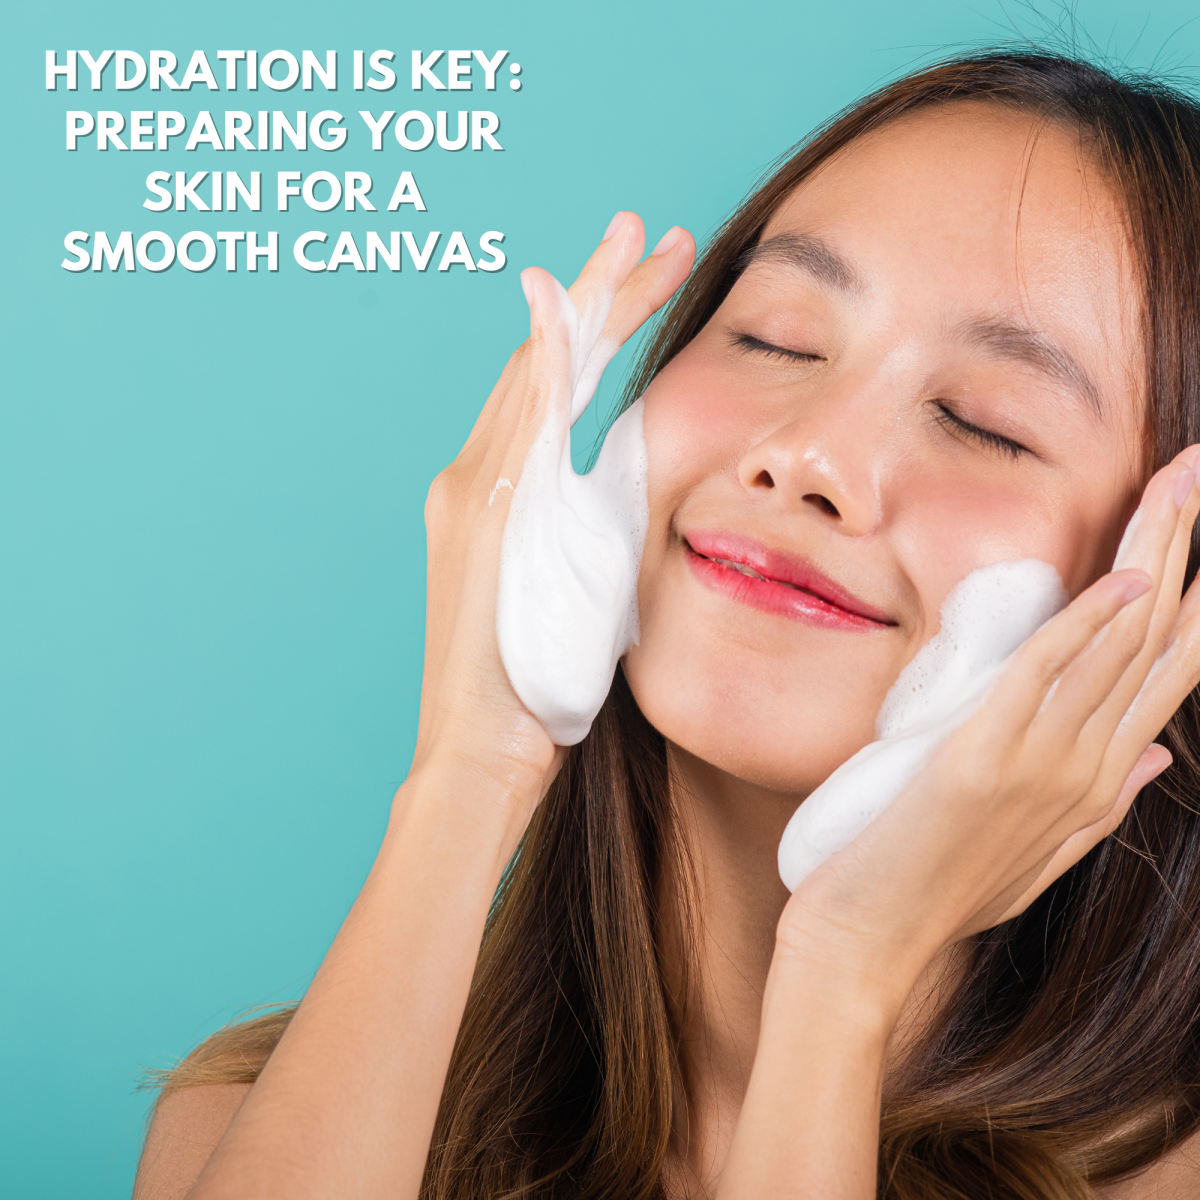 Hydration is Key: Preparing Your Skin for a Smooth Canvas